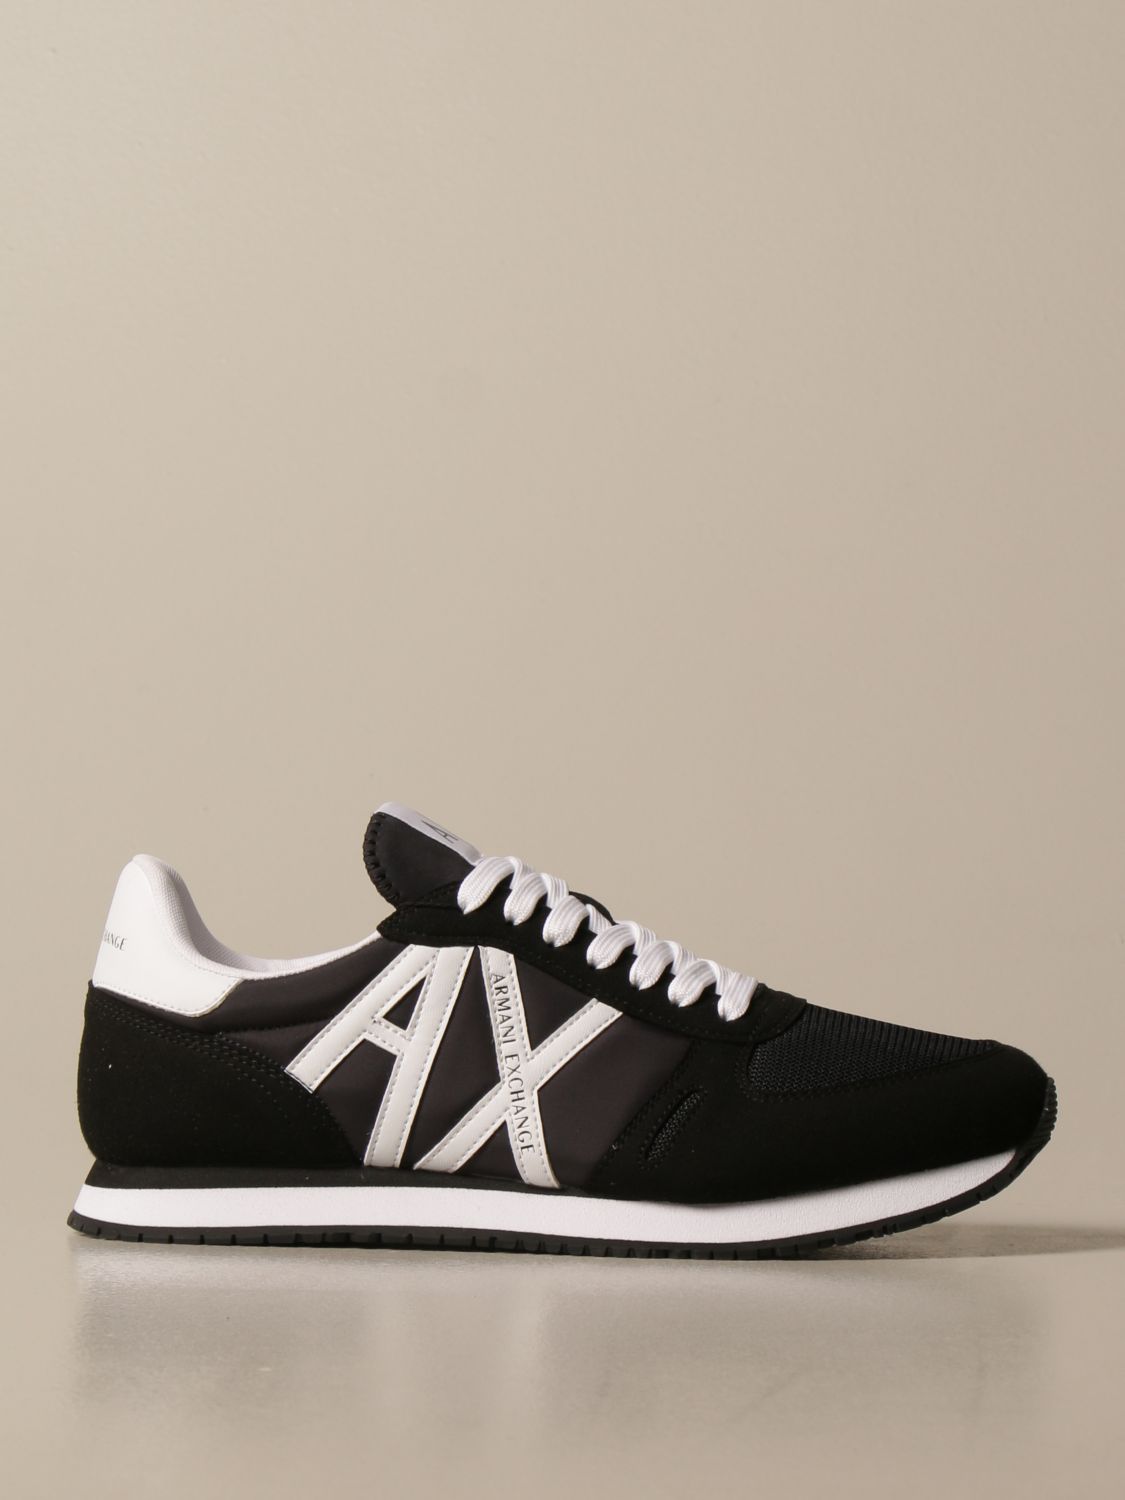 ARMANI EXCHANGE: Basic running sneakers with contrast logo - Black | Armani  Exchange sneakers XUX017 XCC68 online on 